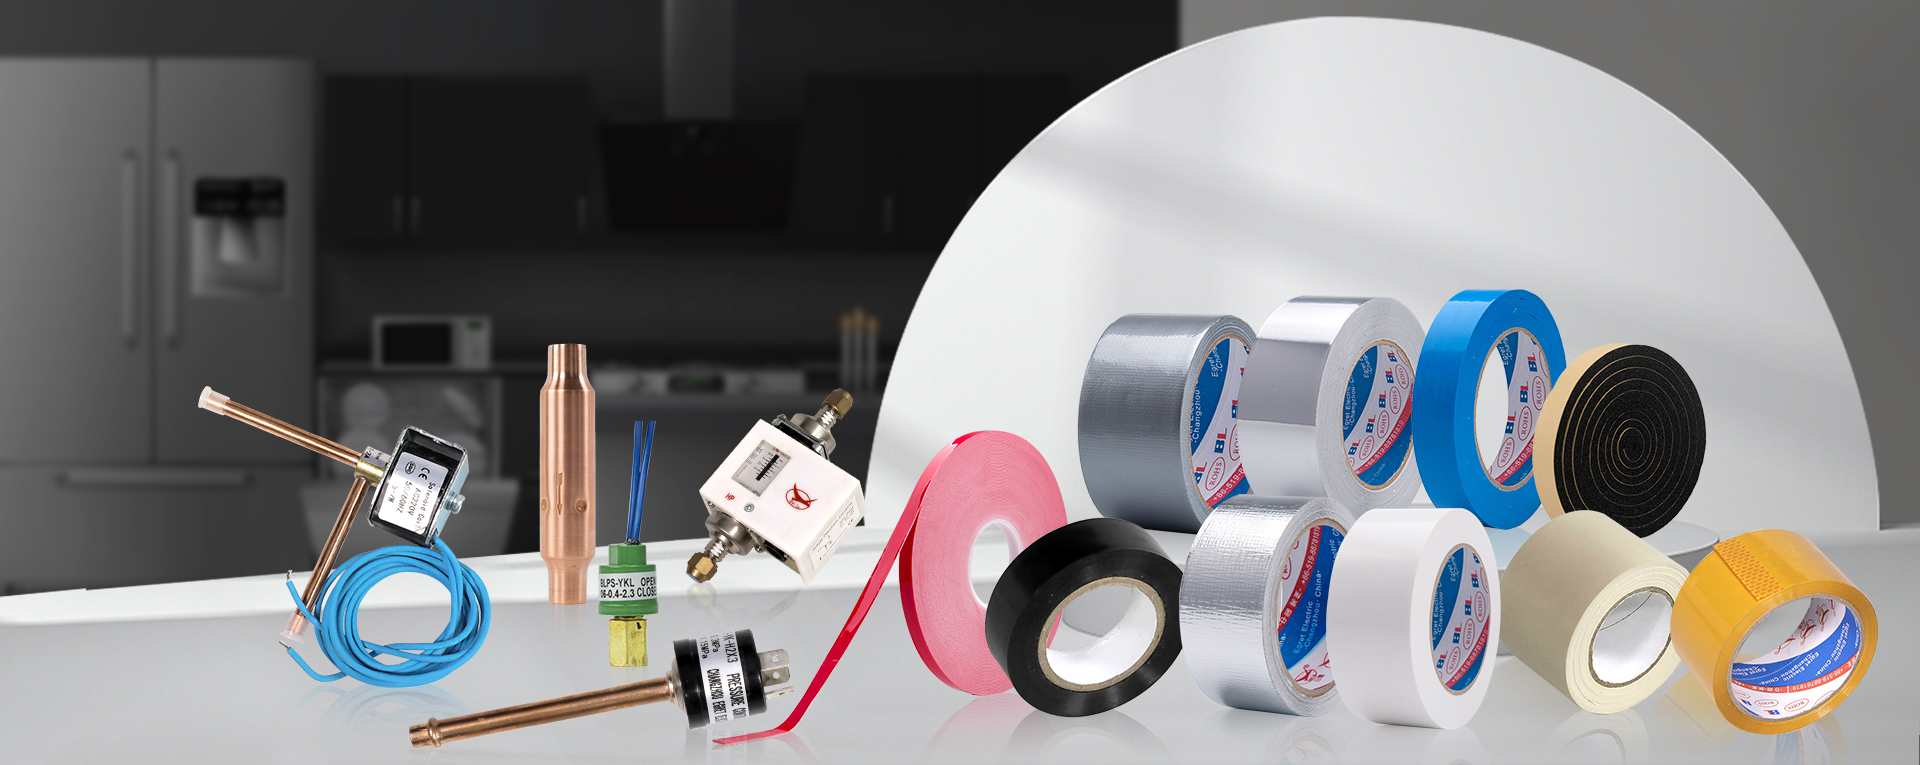 Adhesive Tape & HVAC Parts For Sale